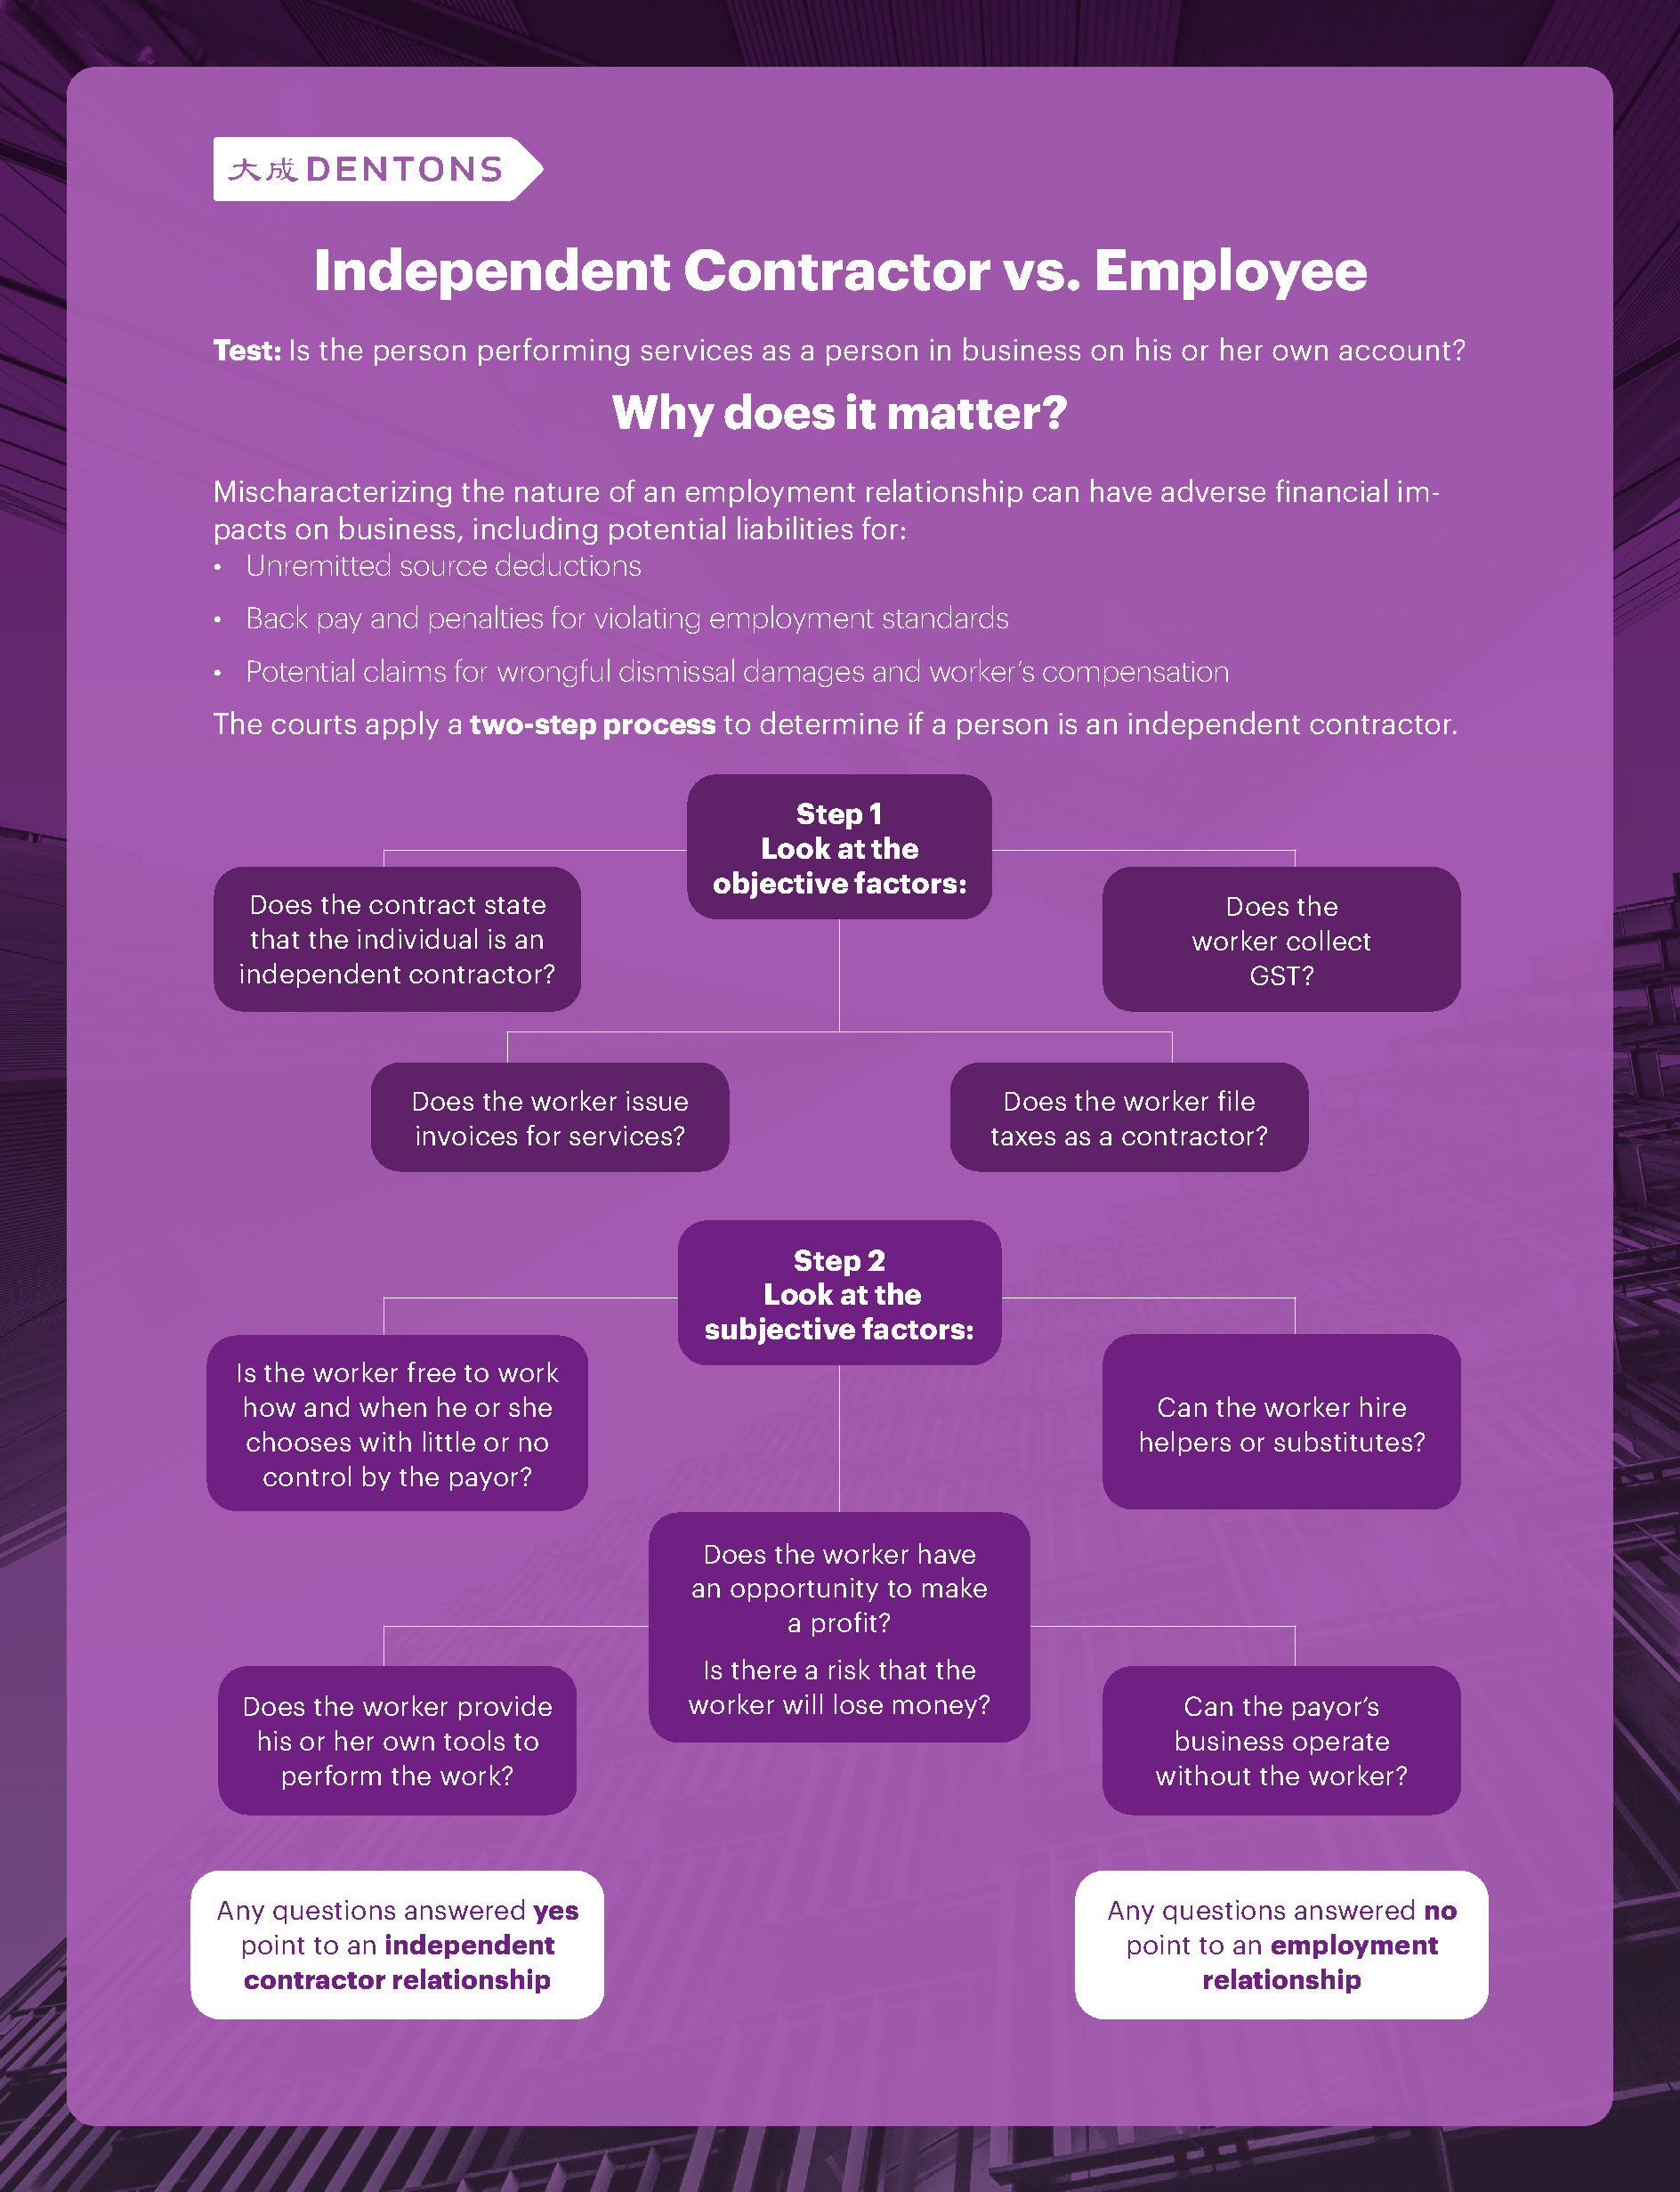 Employee or independent contractor?